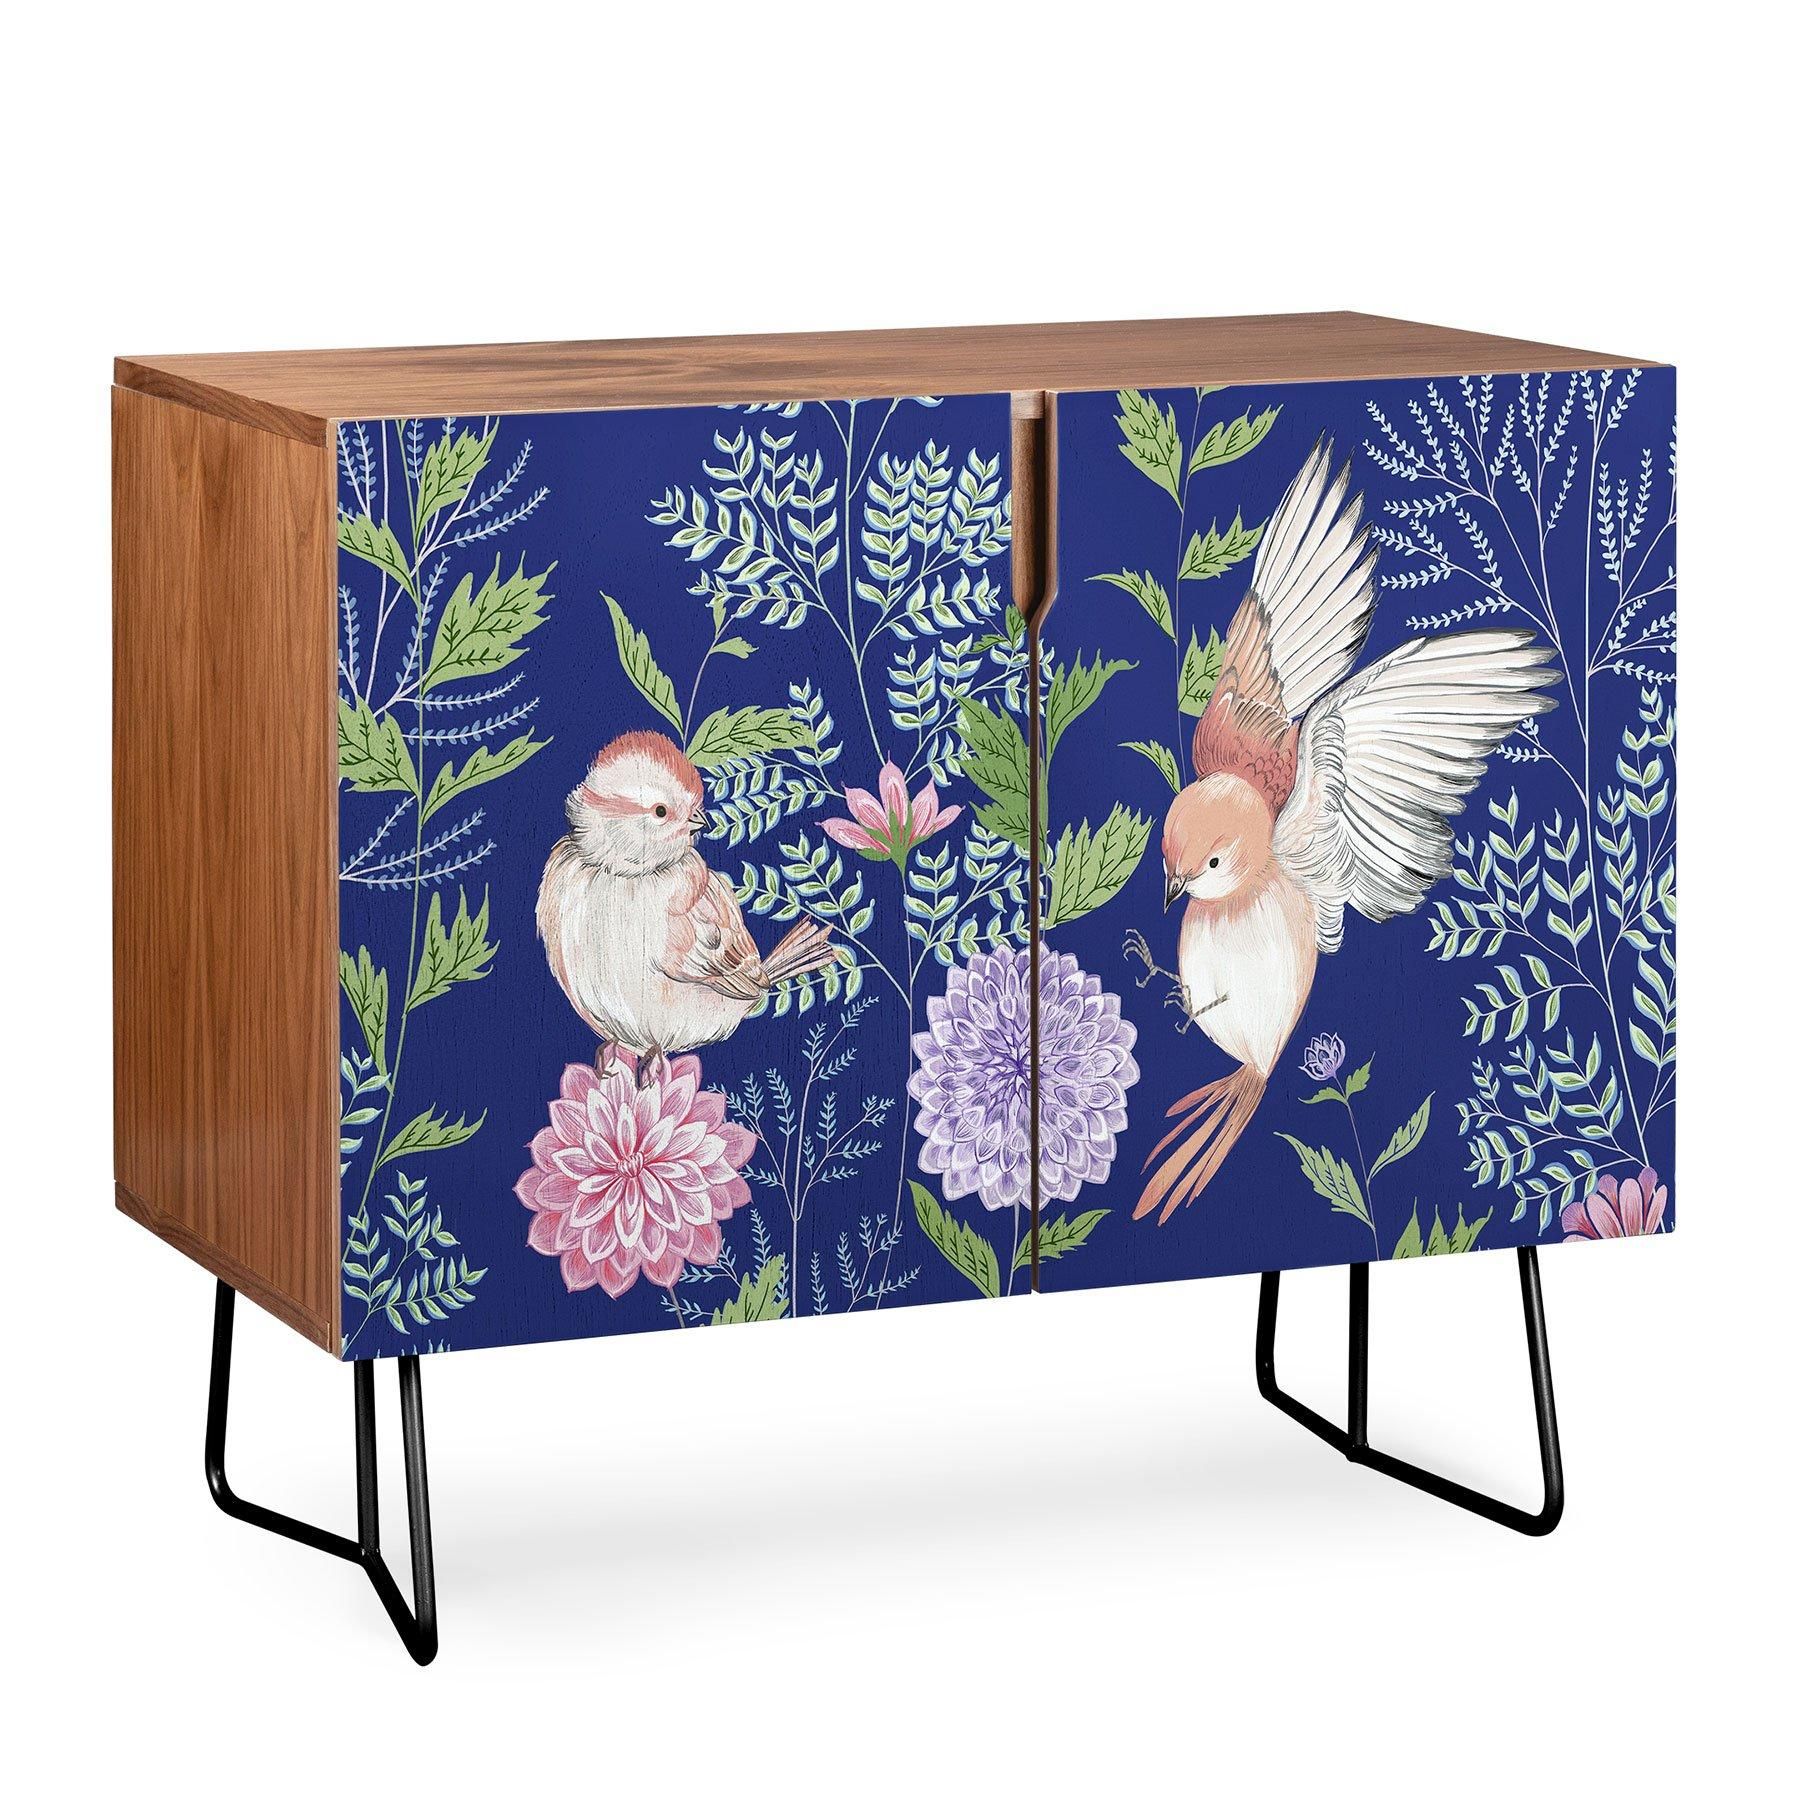 Pimlada Phuapradit Night Garden Credenza Intended For Emerald Cubes Credenzas (View 9 of 30)